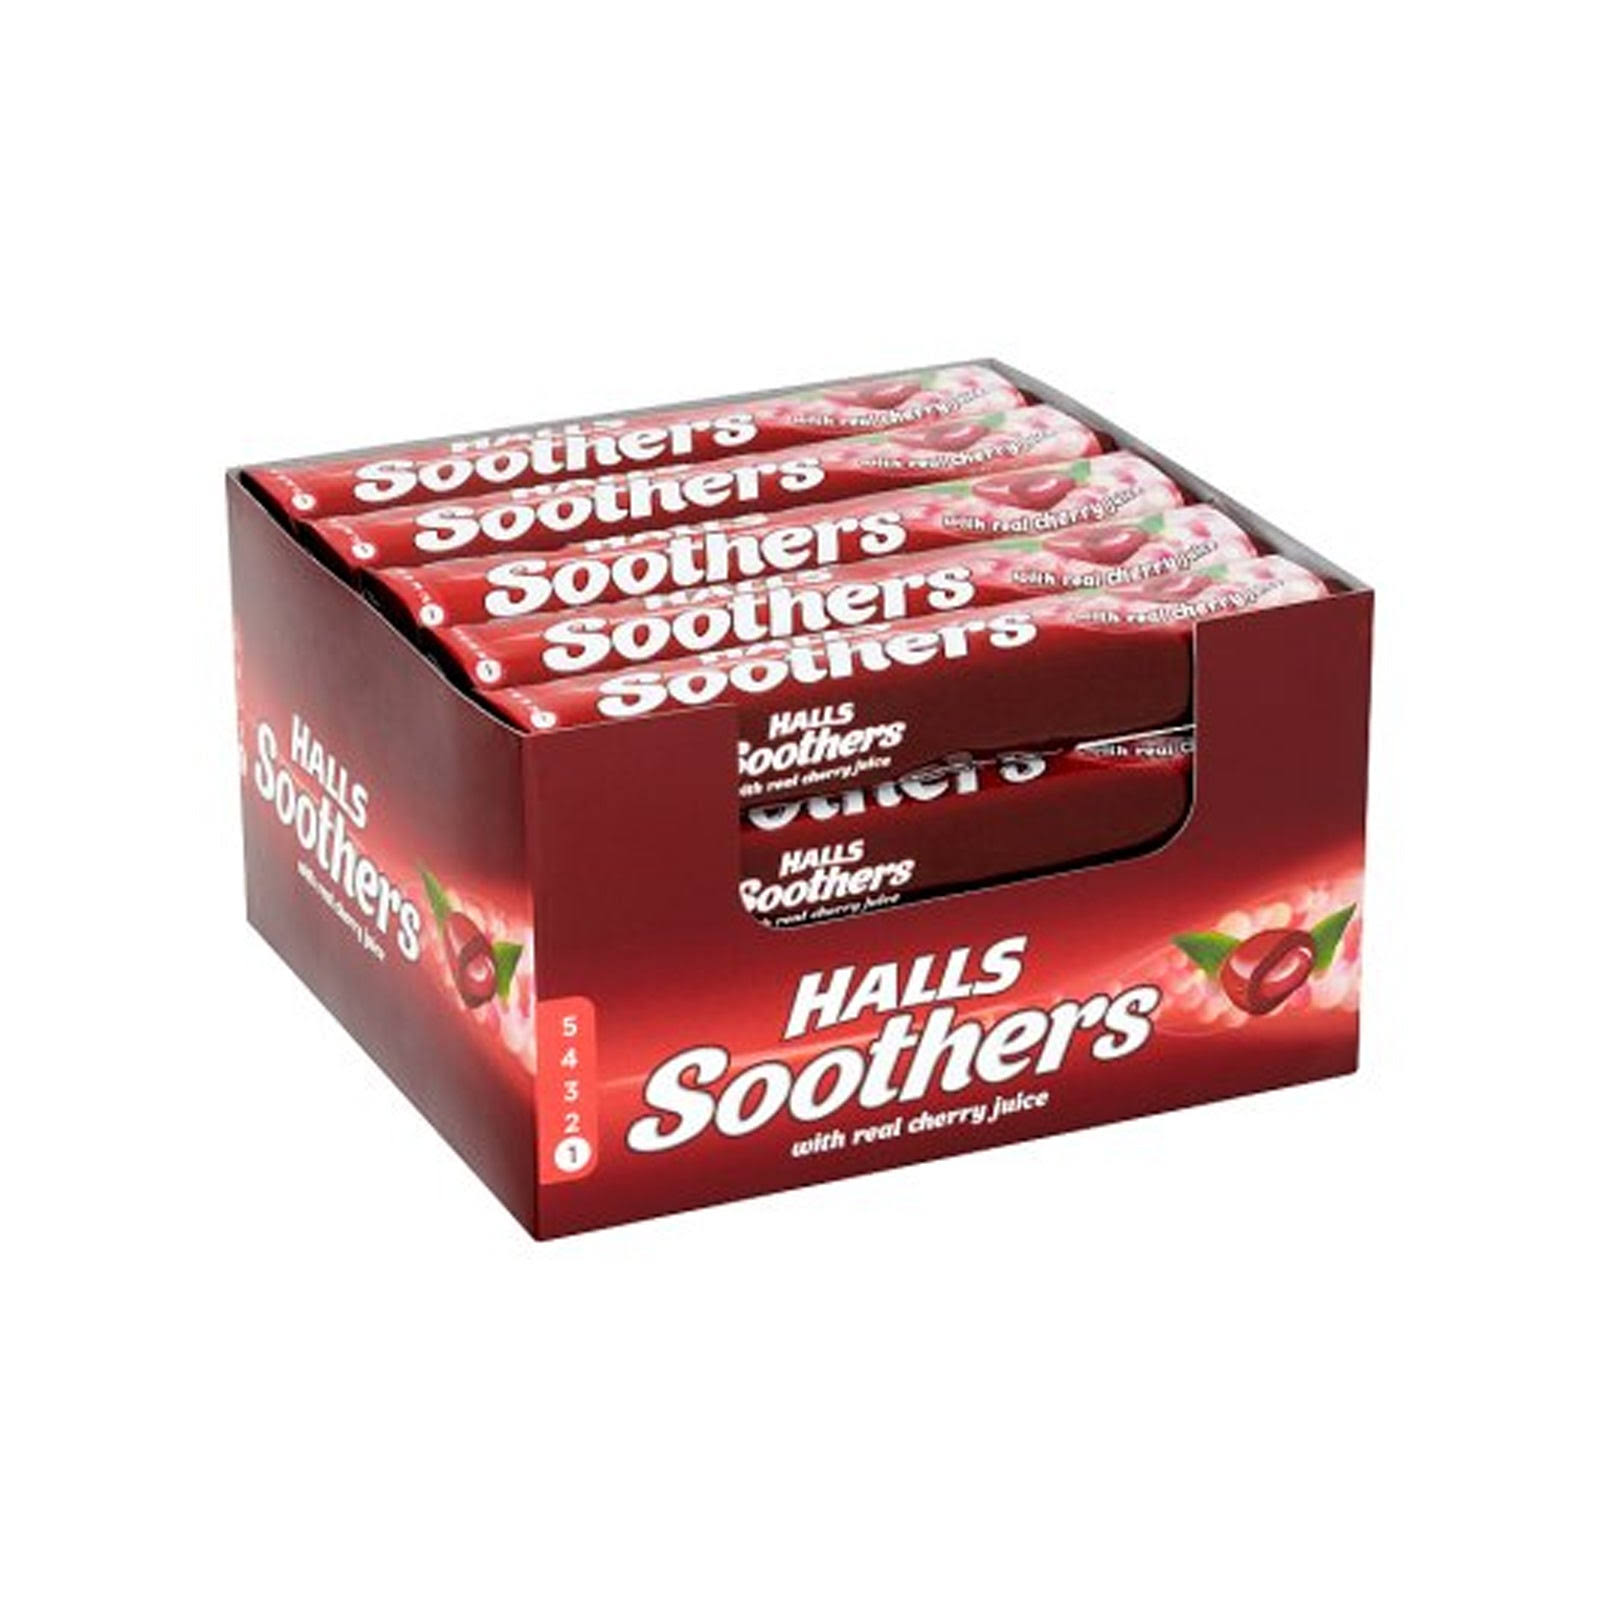 Halls Soothers with Real Cherry Juice Throat Sweets